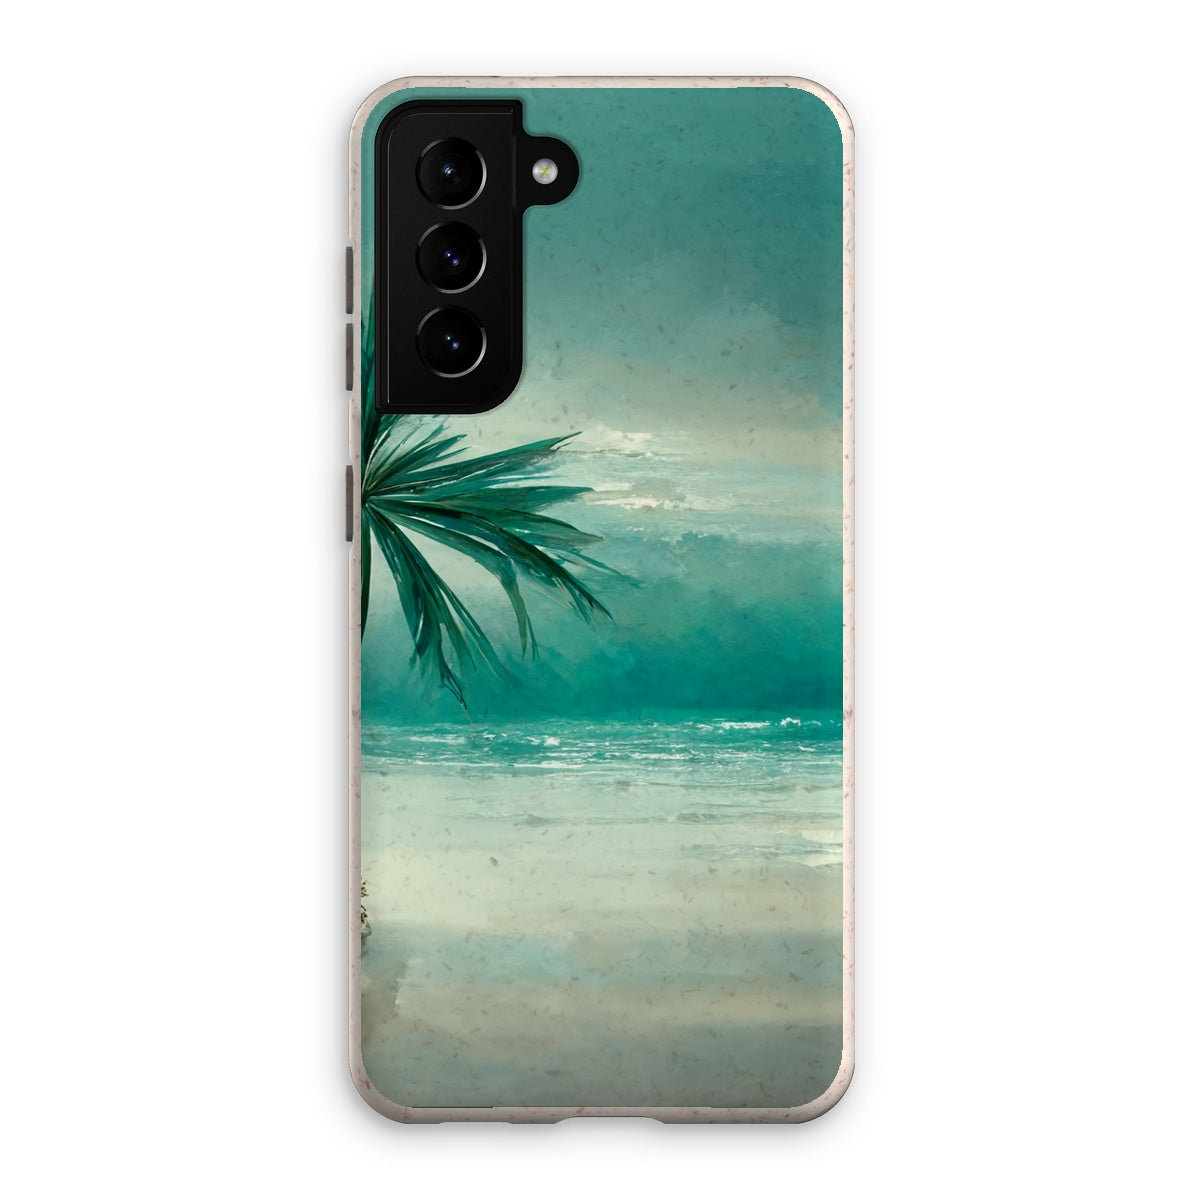 Lonesome Palm Eco Phone Case